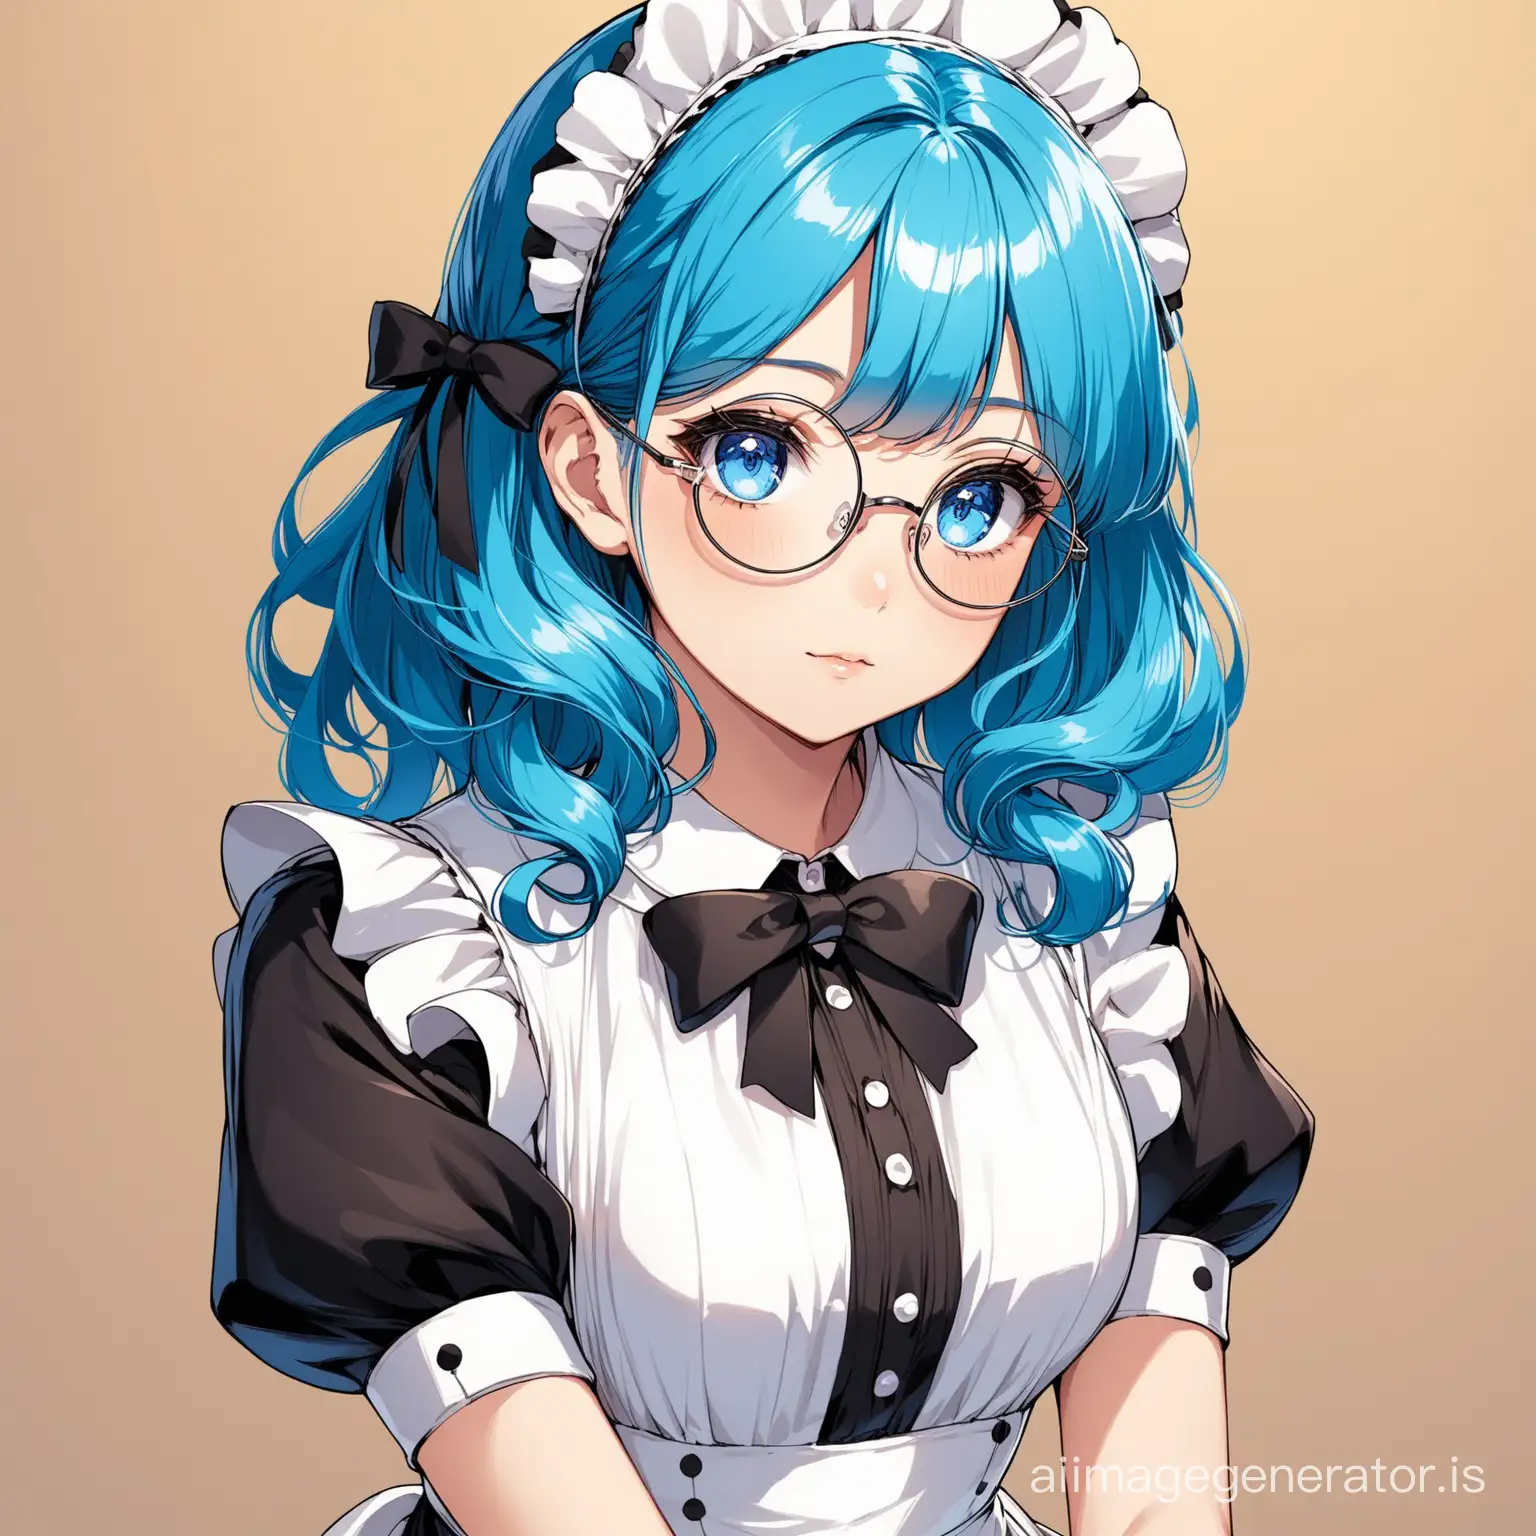 The girl with blue hair, blue eyes, big round glasses, in a maid costume, her hair is slightly curly